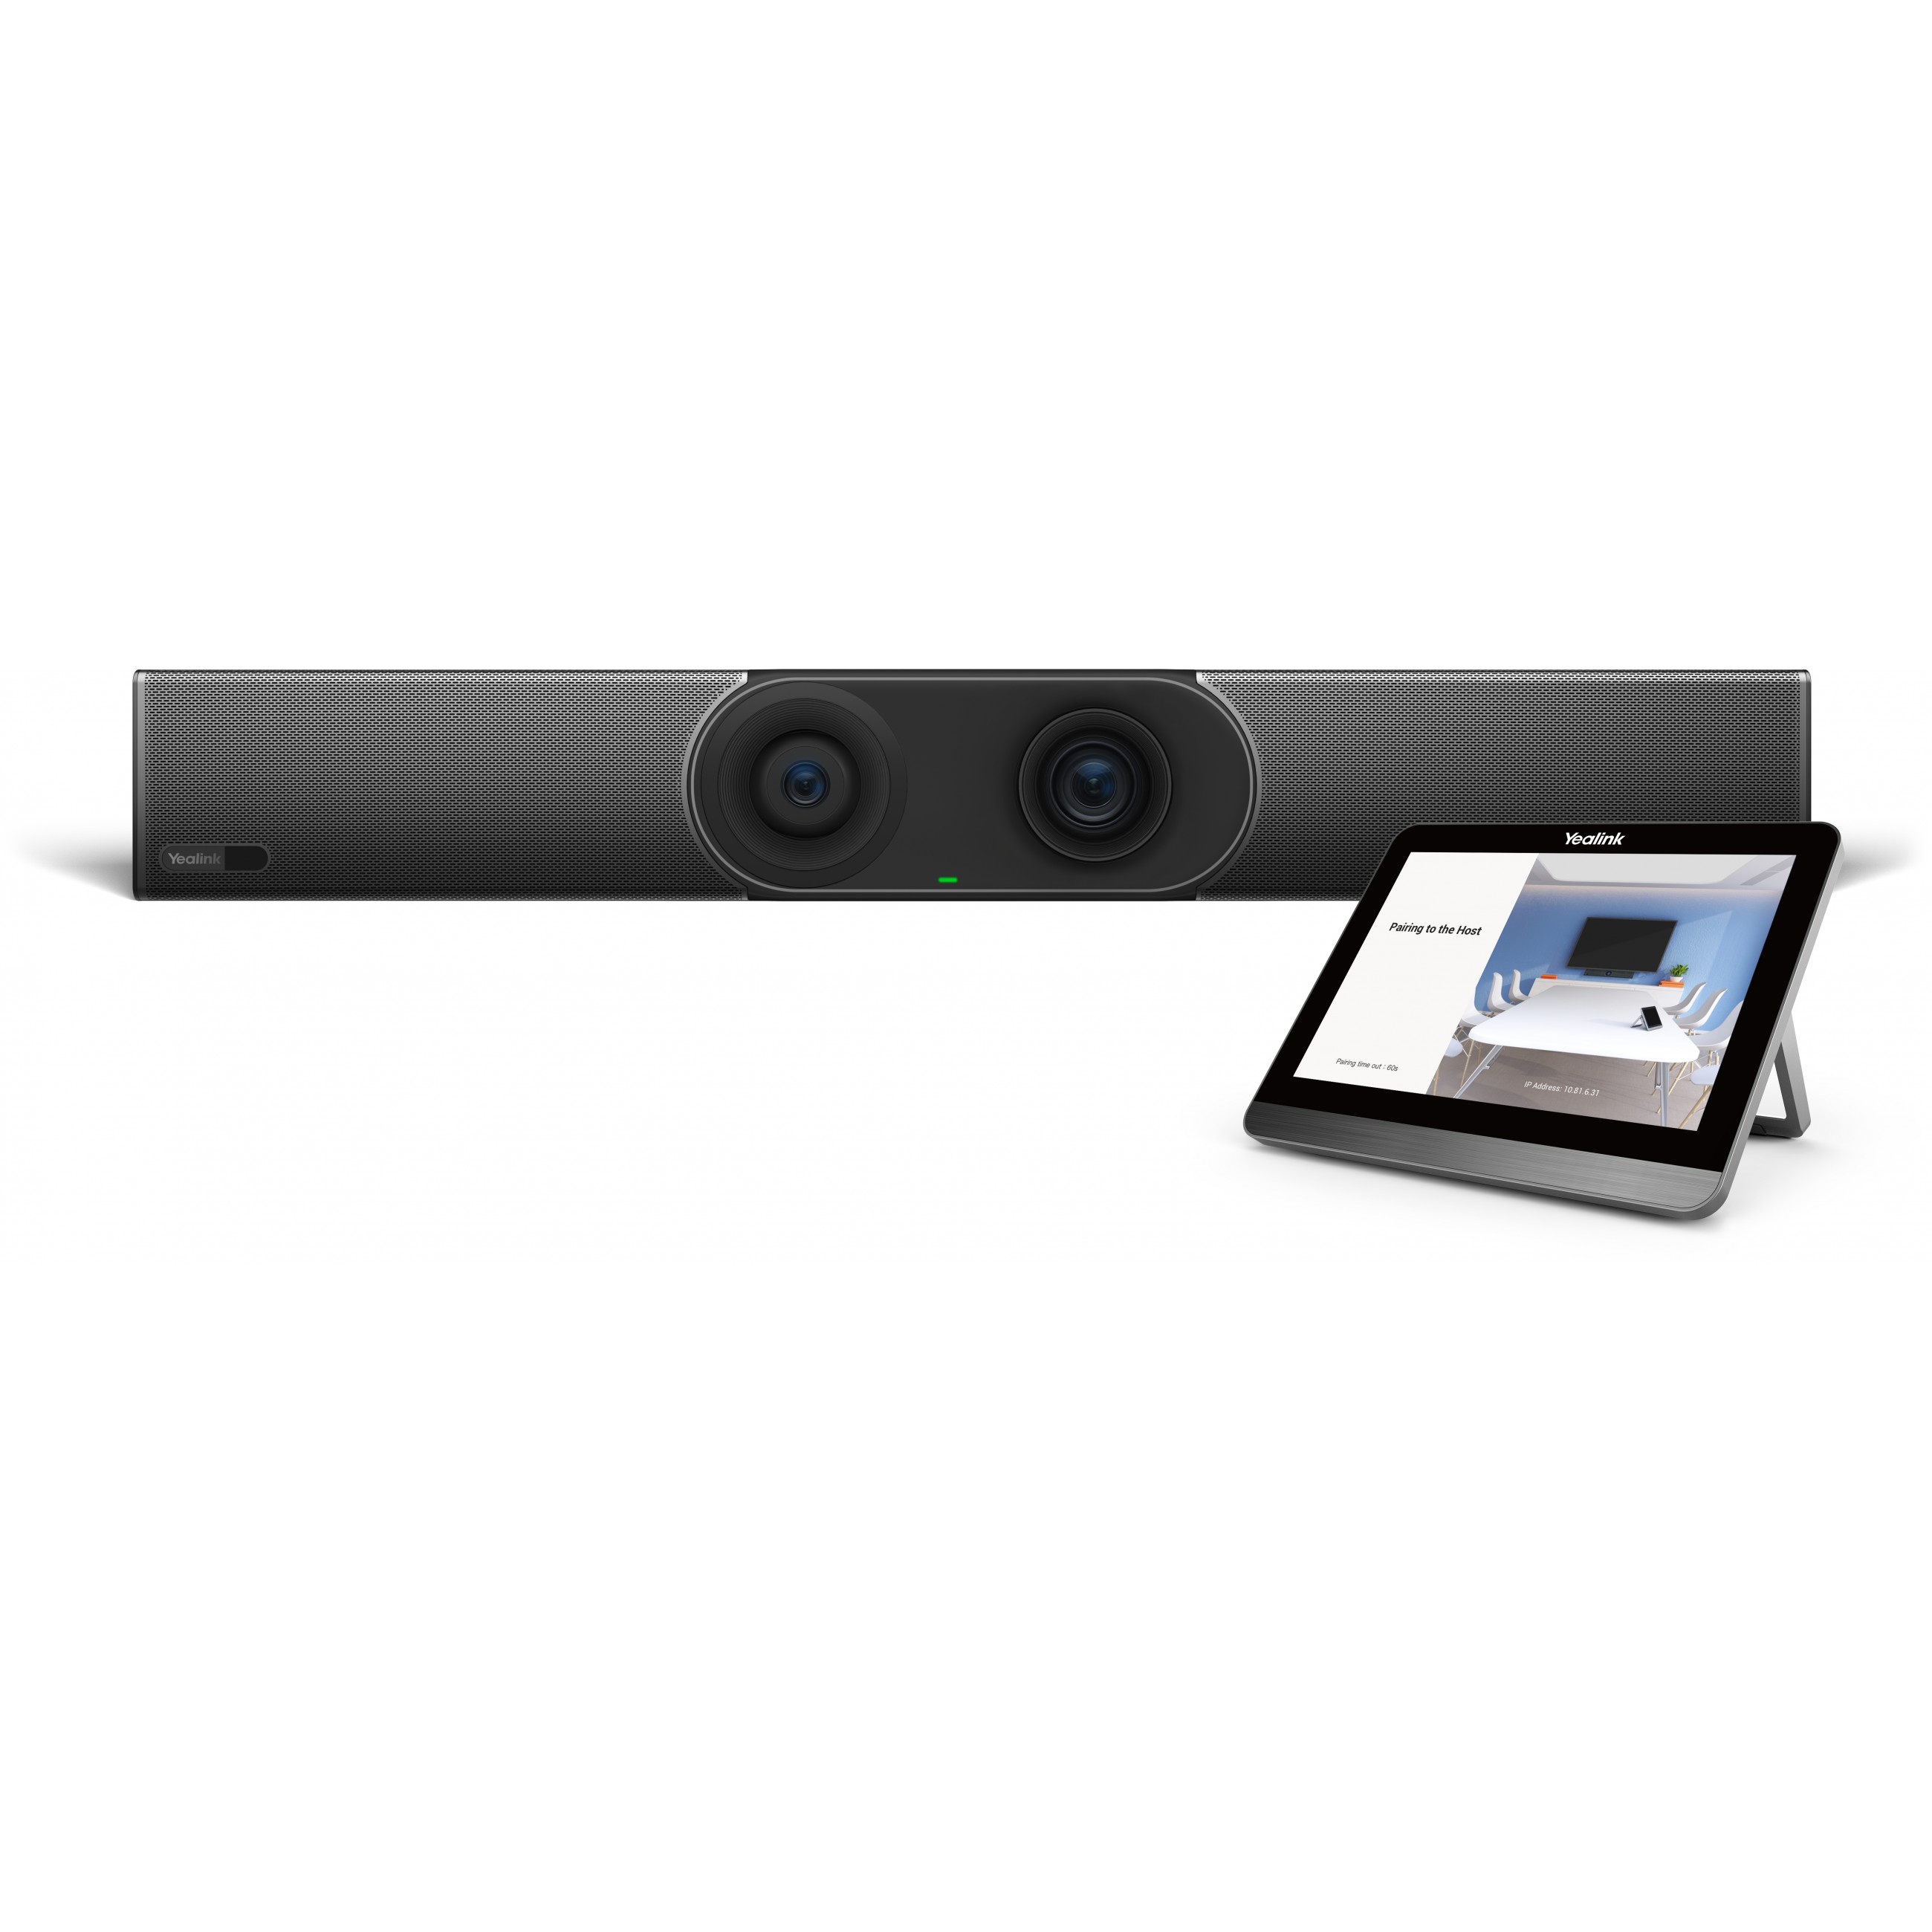 Yealink A30-020 video conferencing system